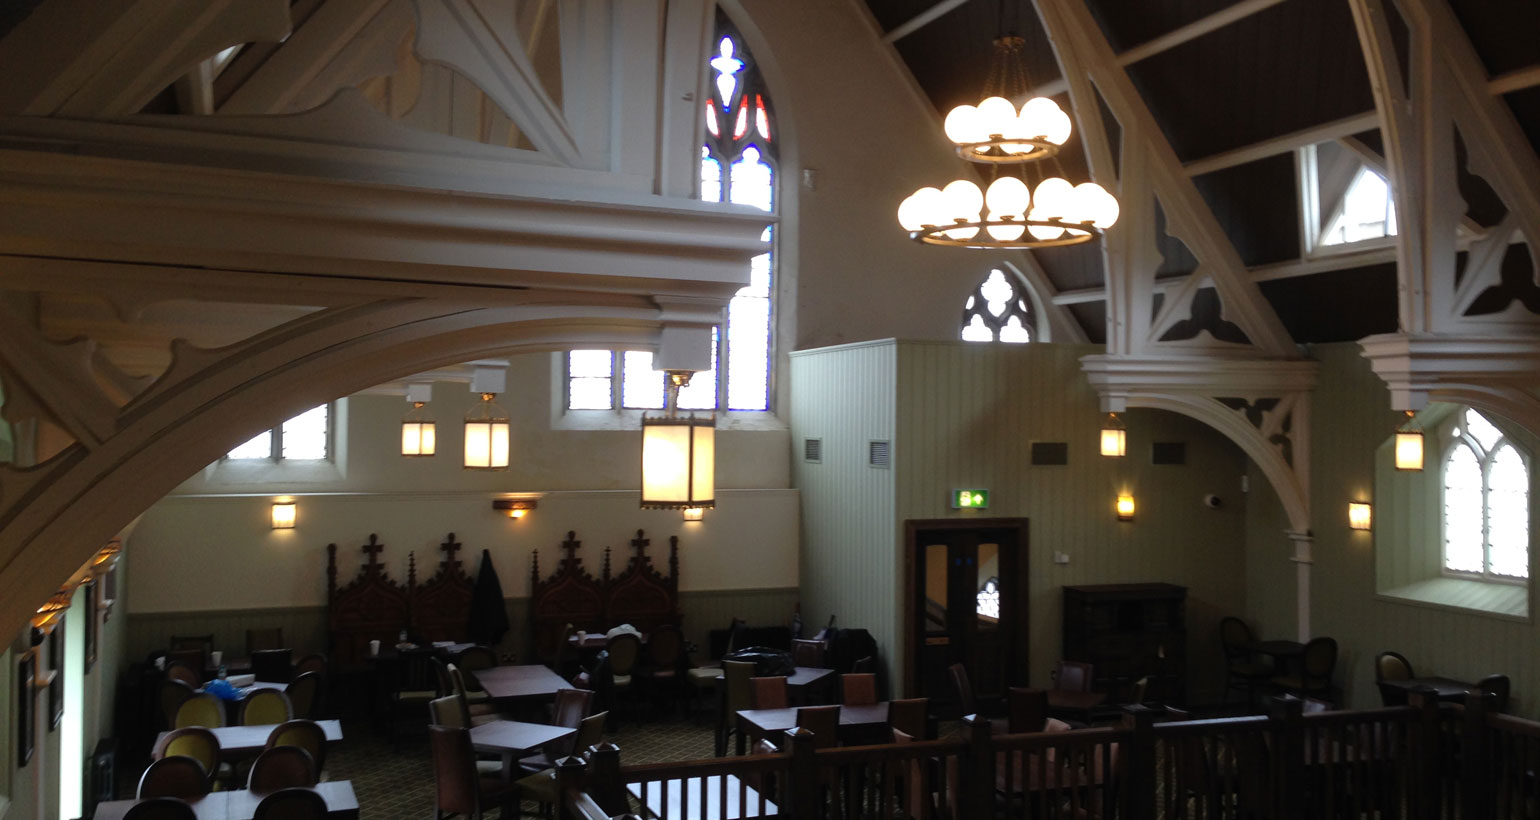 Decorating of Wetherspoons Pub – Newport, Isle of Wight